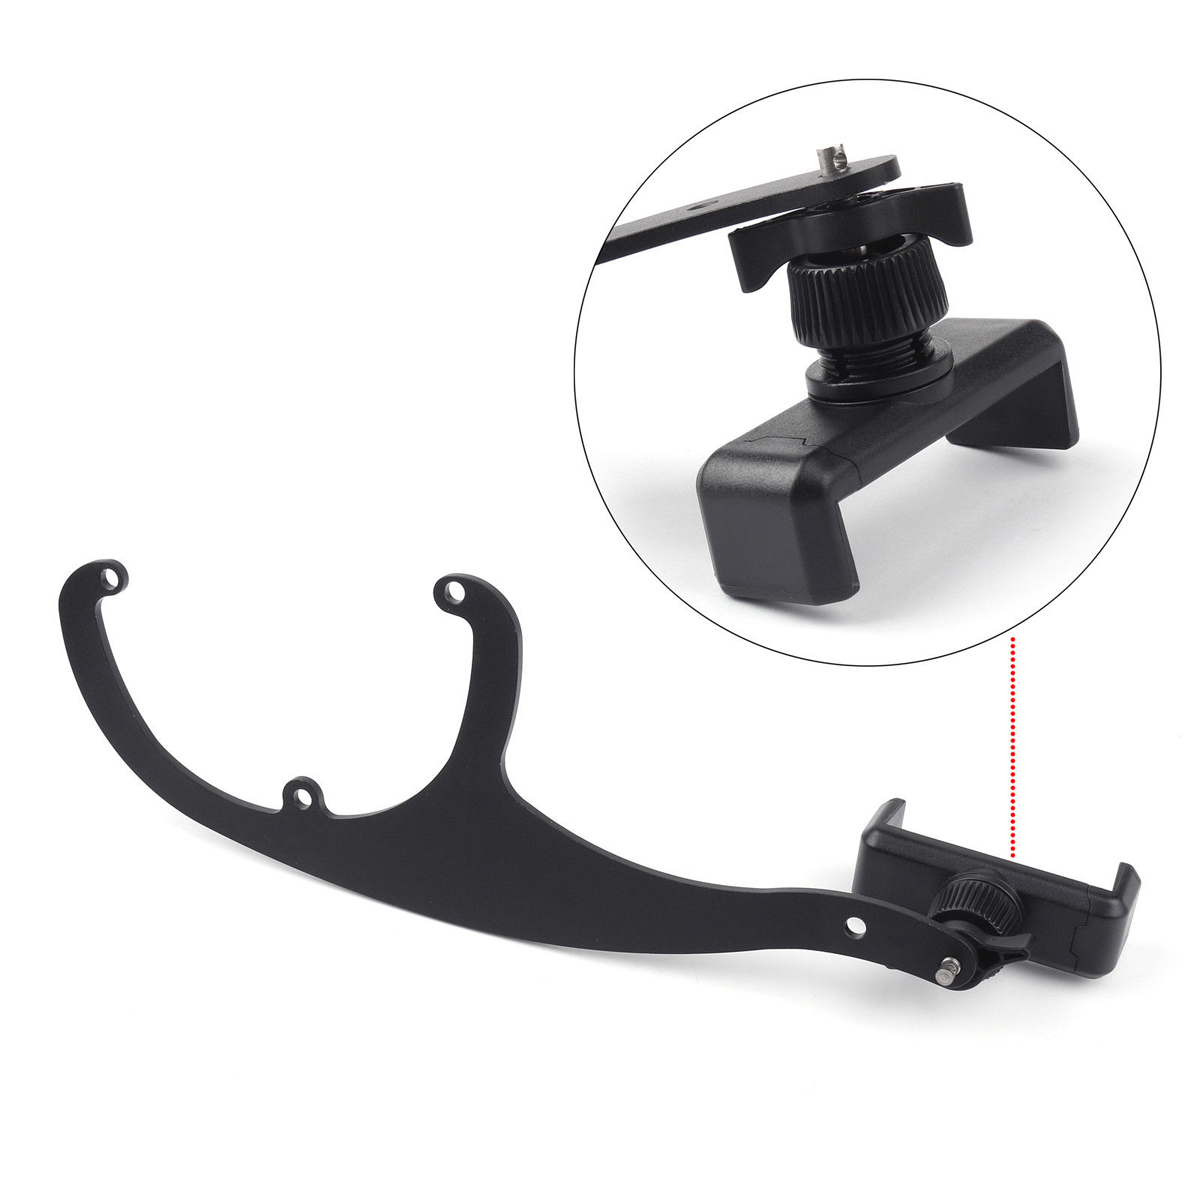 Bakeey-360deg-Rotation-Car-Phone-Mount-Cradle-Holder-Stand-for-Mini-Cooper-R60R61-R55R56-F60-1637156-6